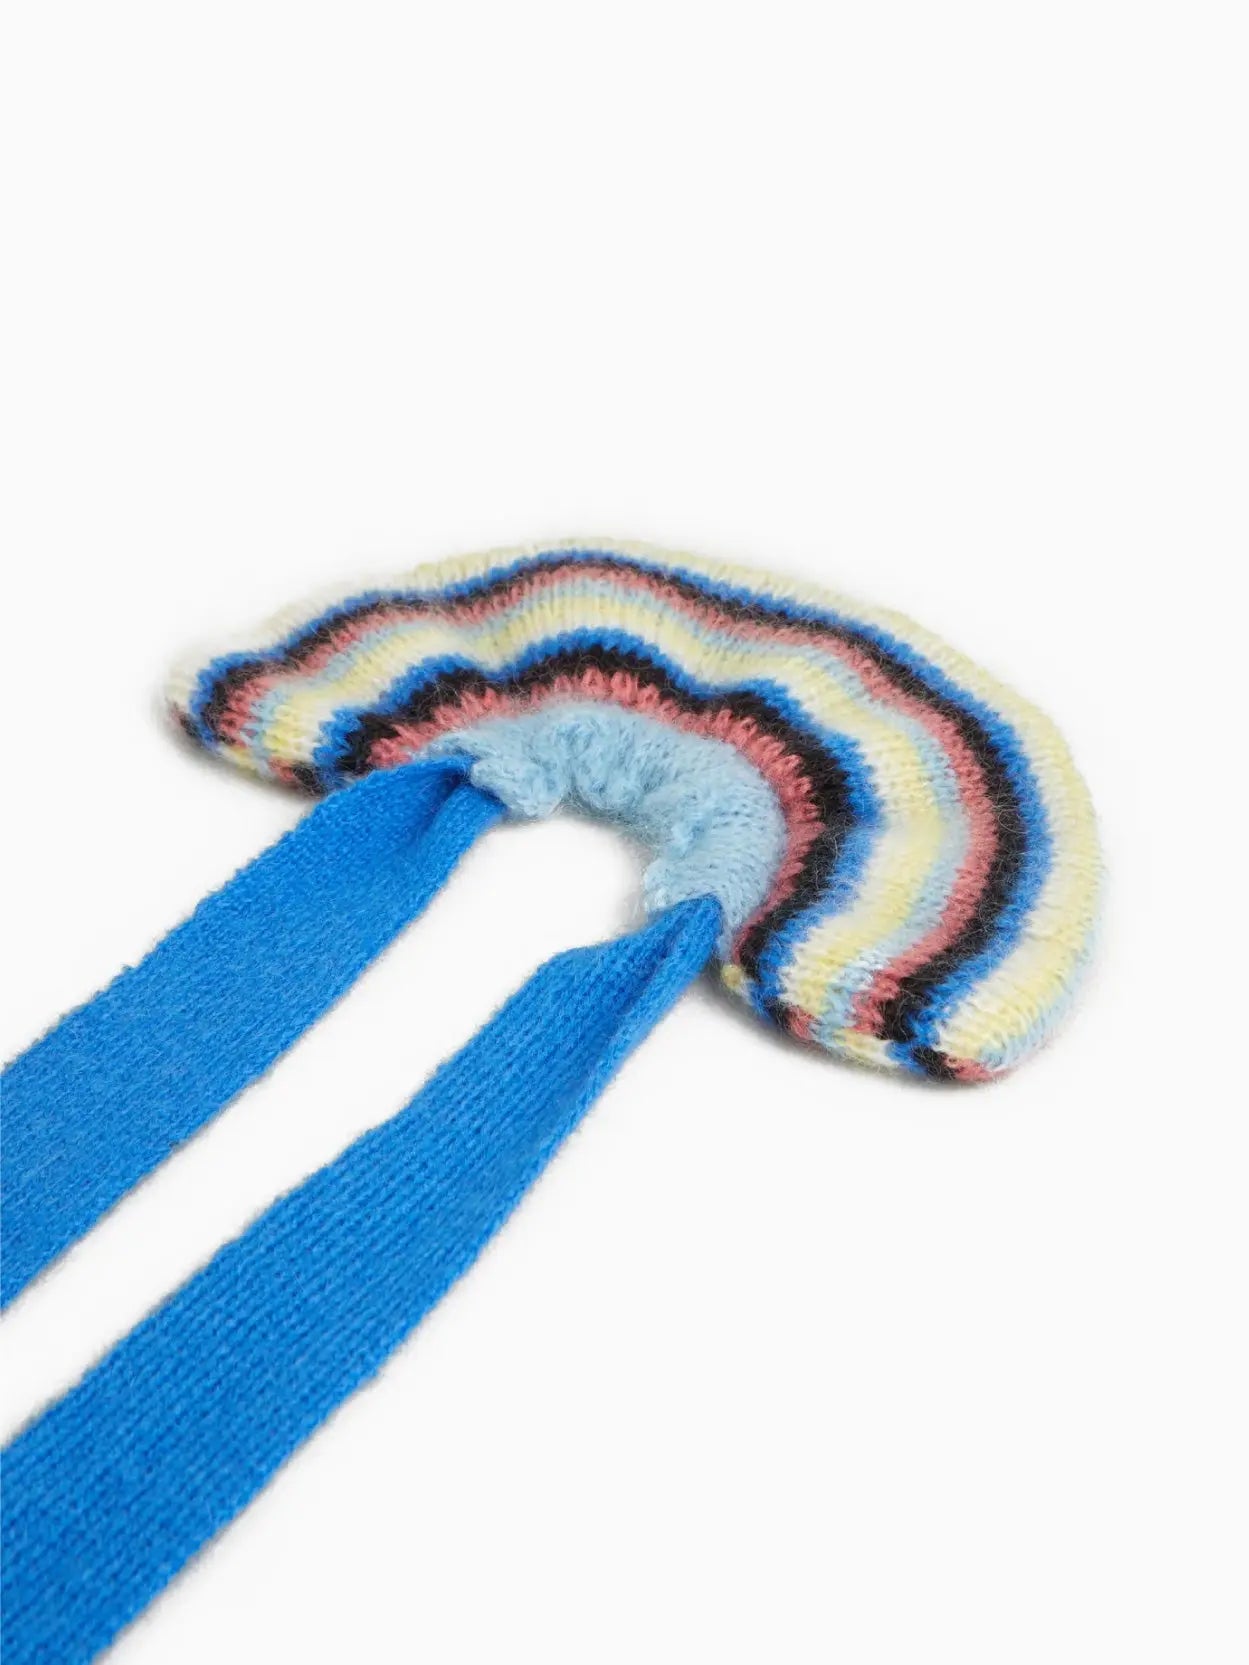 An Elvira Bow Scrunchie by Tomasa resembling a rainbow with pastel colors, transitioning from light to dark hues. It has a light blue center and a bright blue tied end, with a small white label. The background is plain white, perfect for showcasing this charming accessory available at Bassalstore in Barcelona.